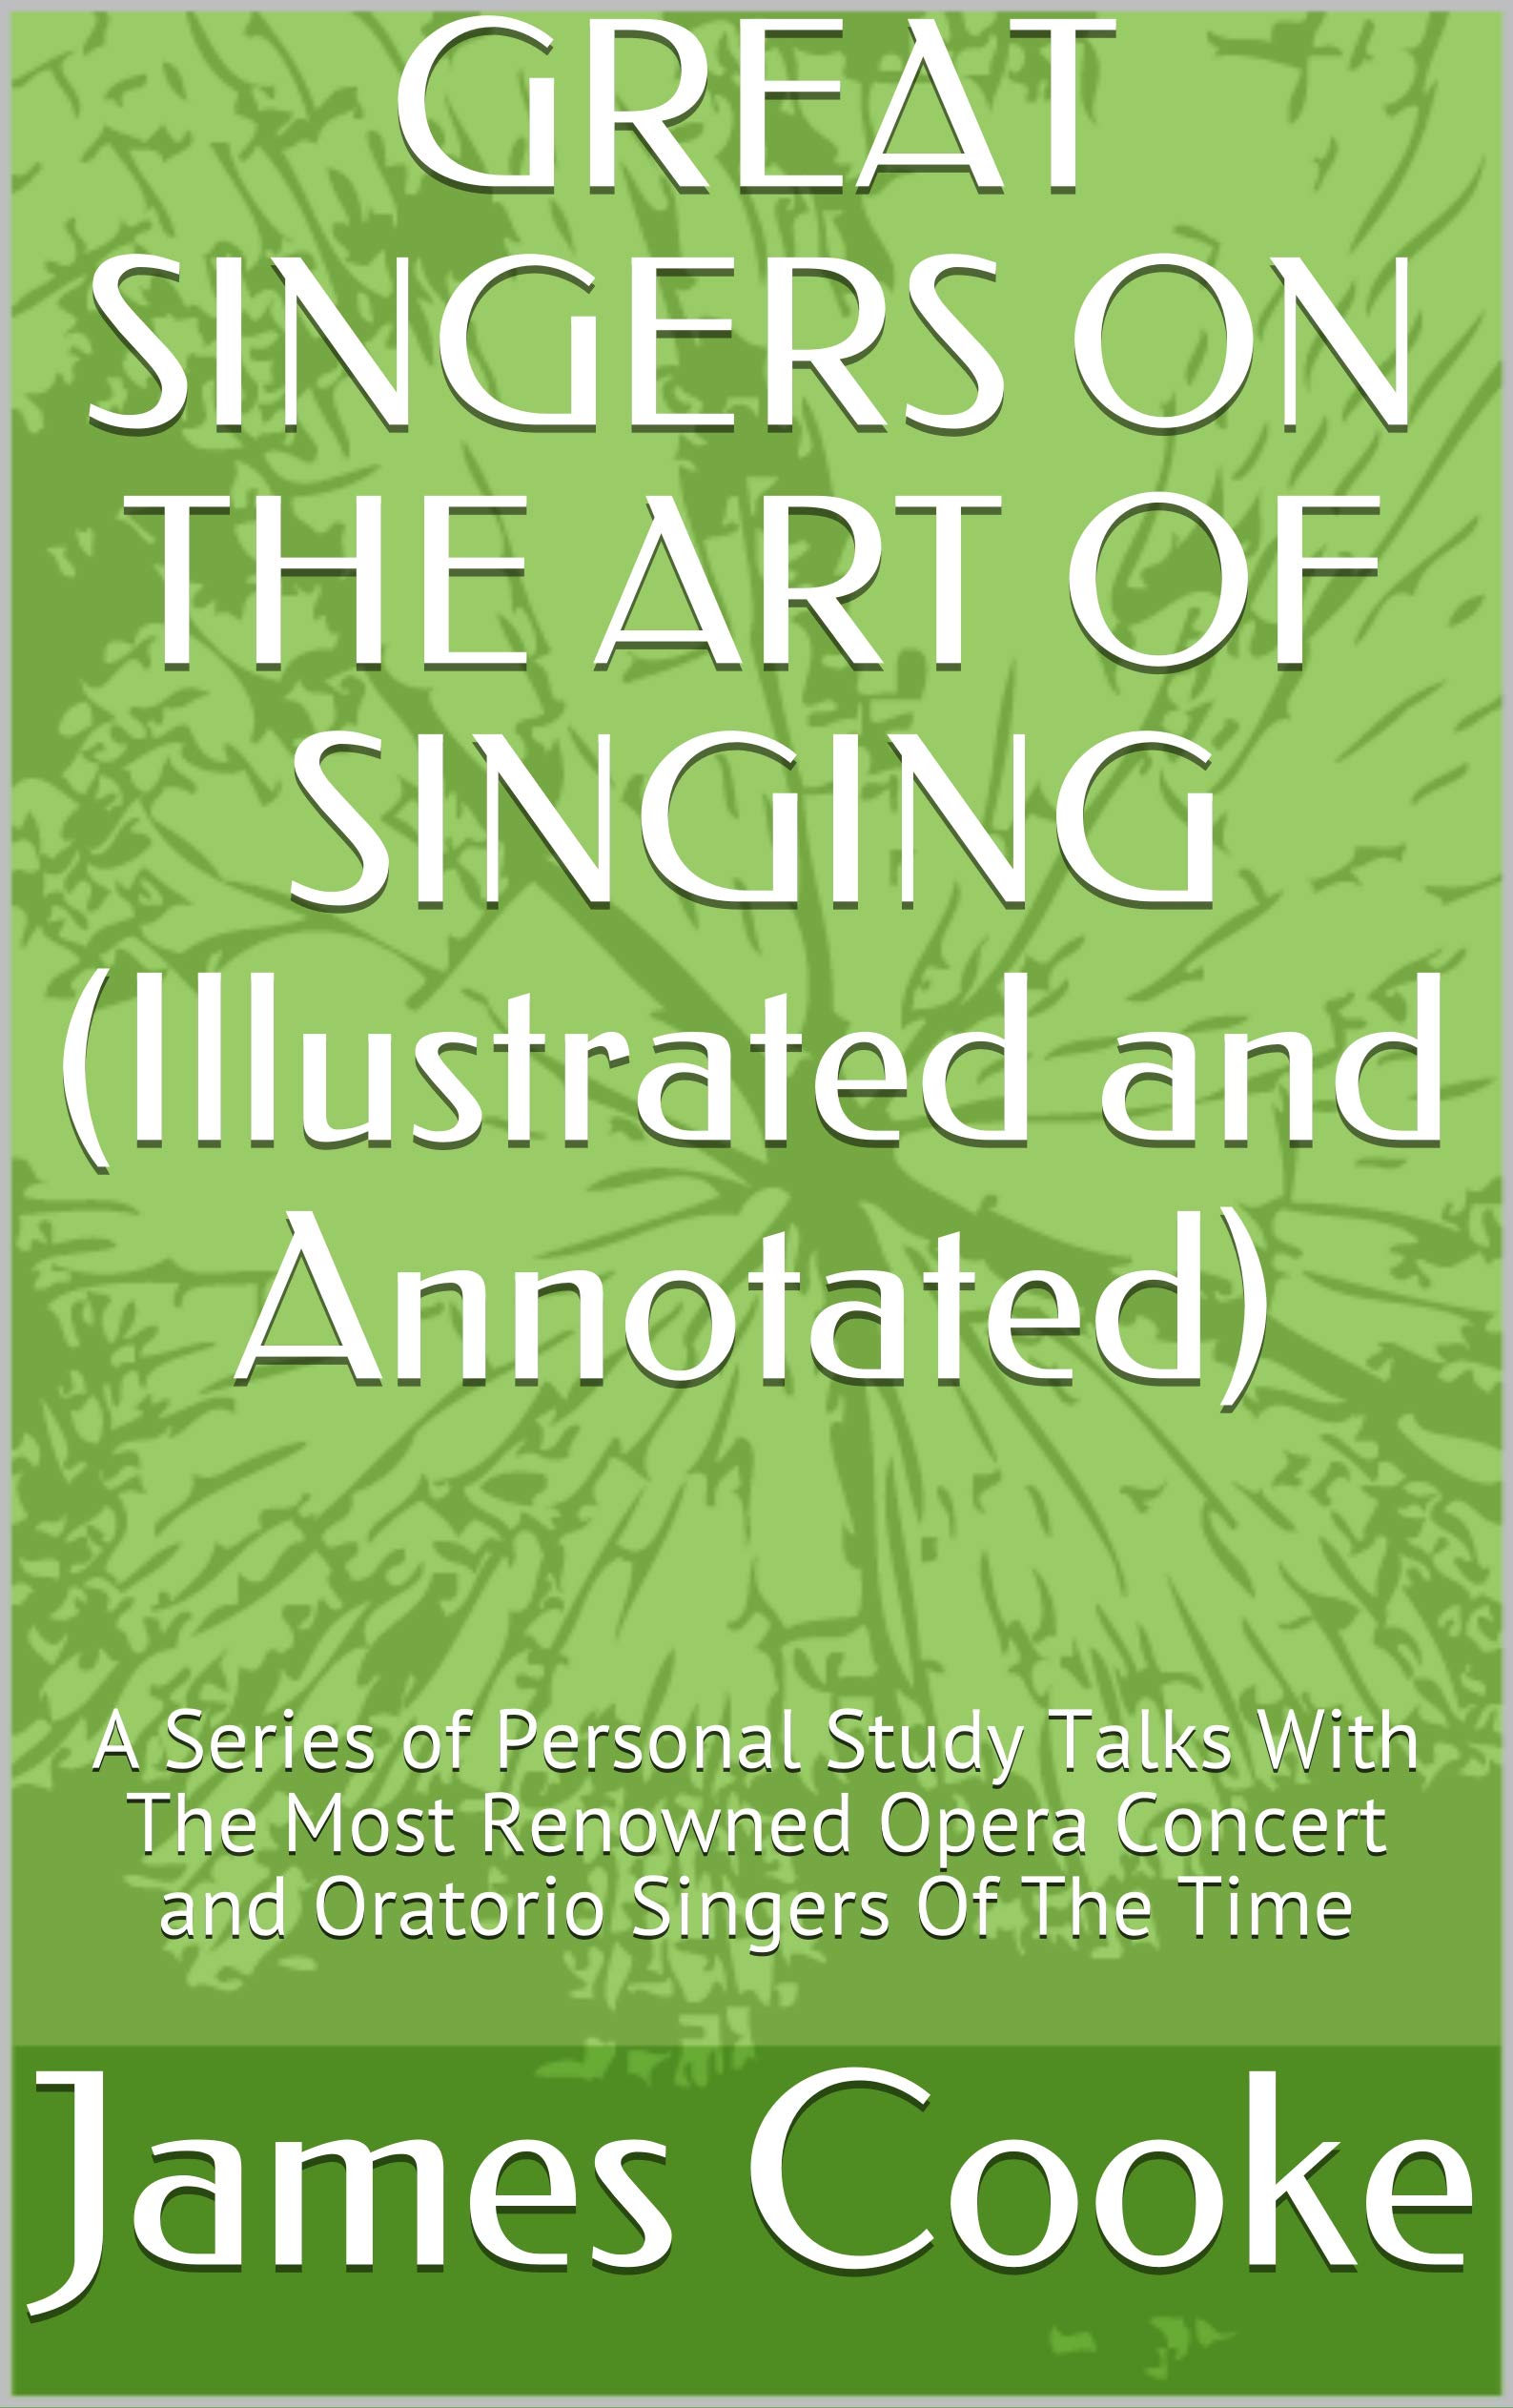 GREAT SINGERS ON THE ART OF SINGING (Illustrated and Annotated): A Series of Personal Study Talks With The Most Renowned Opera Concert and Oratorio Singers Of The Time